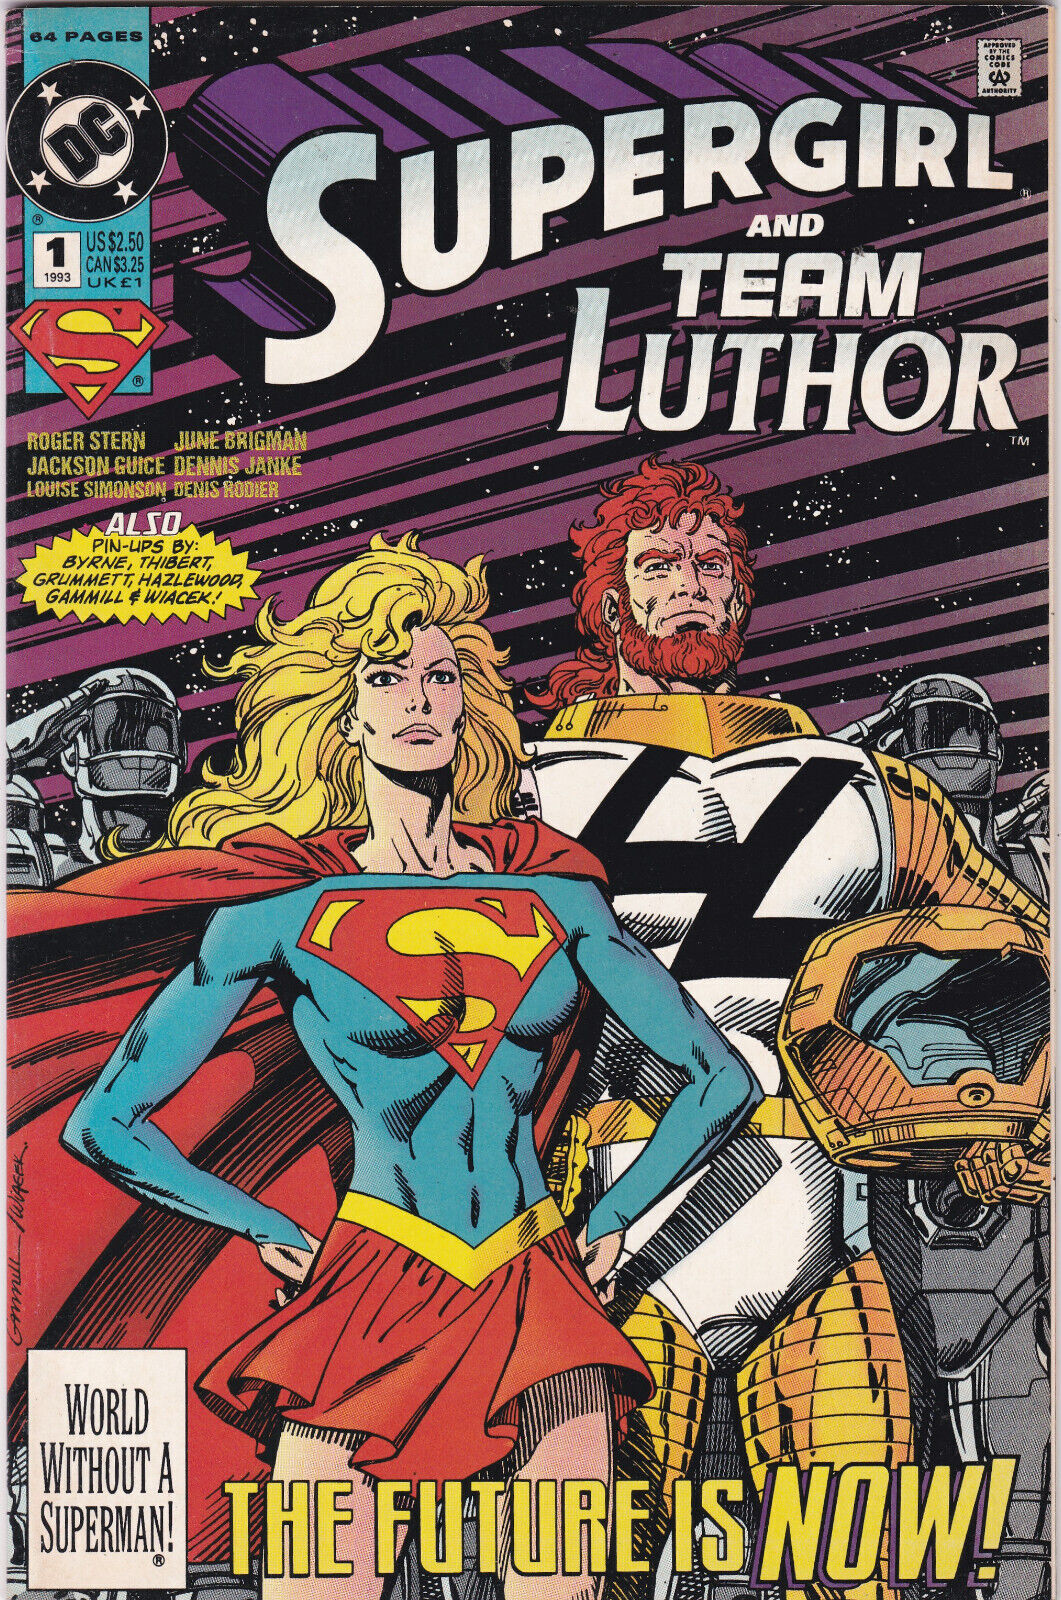 SUPERGIRL AND TEAM LUTHOR #1 DC COMICS 64 Page 1st Print 1993 Superman